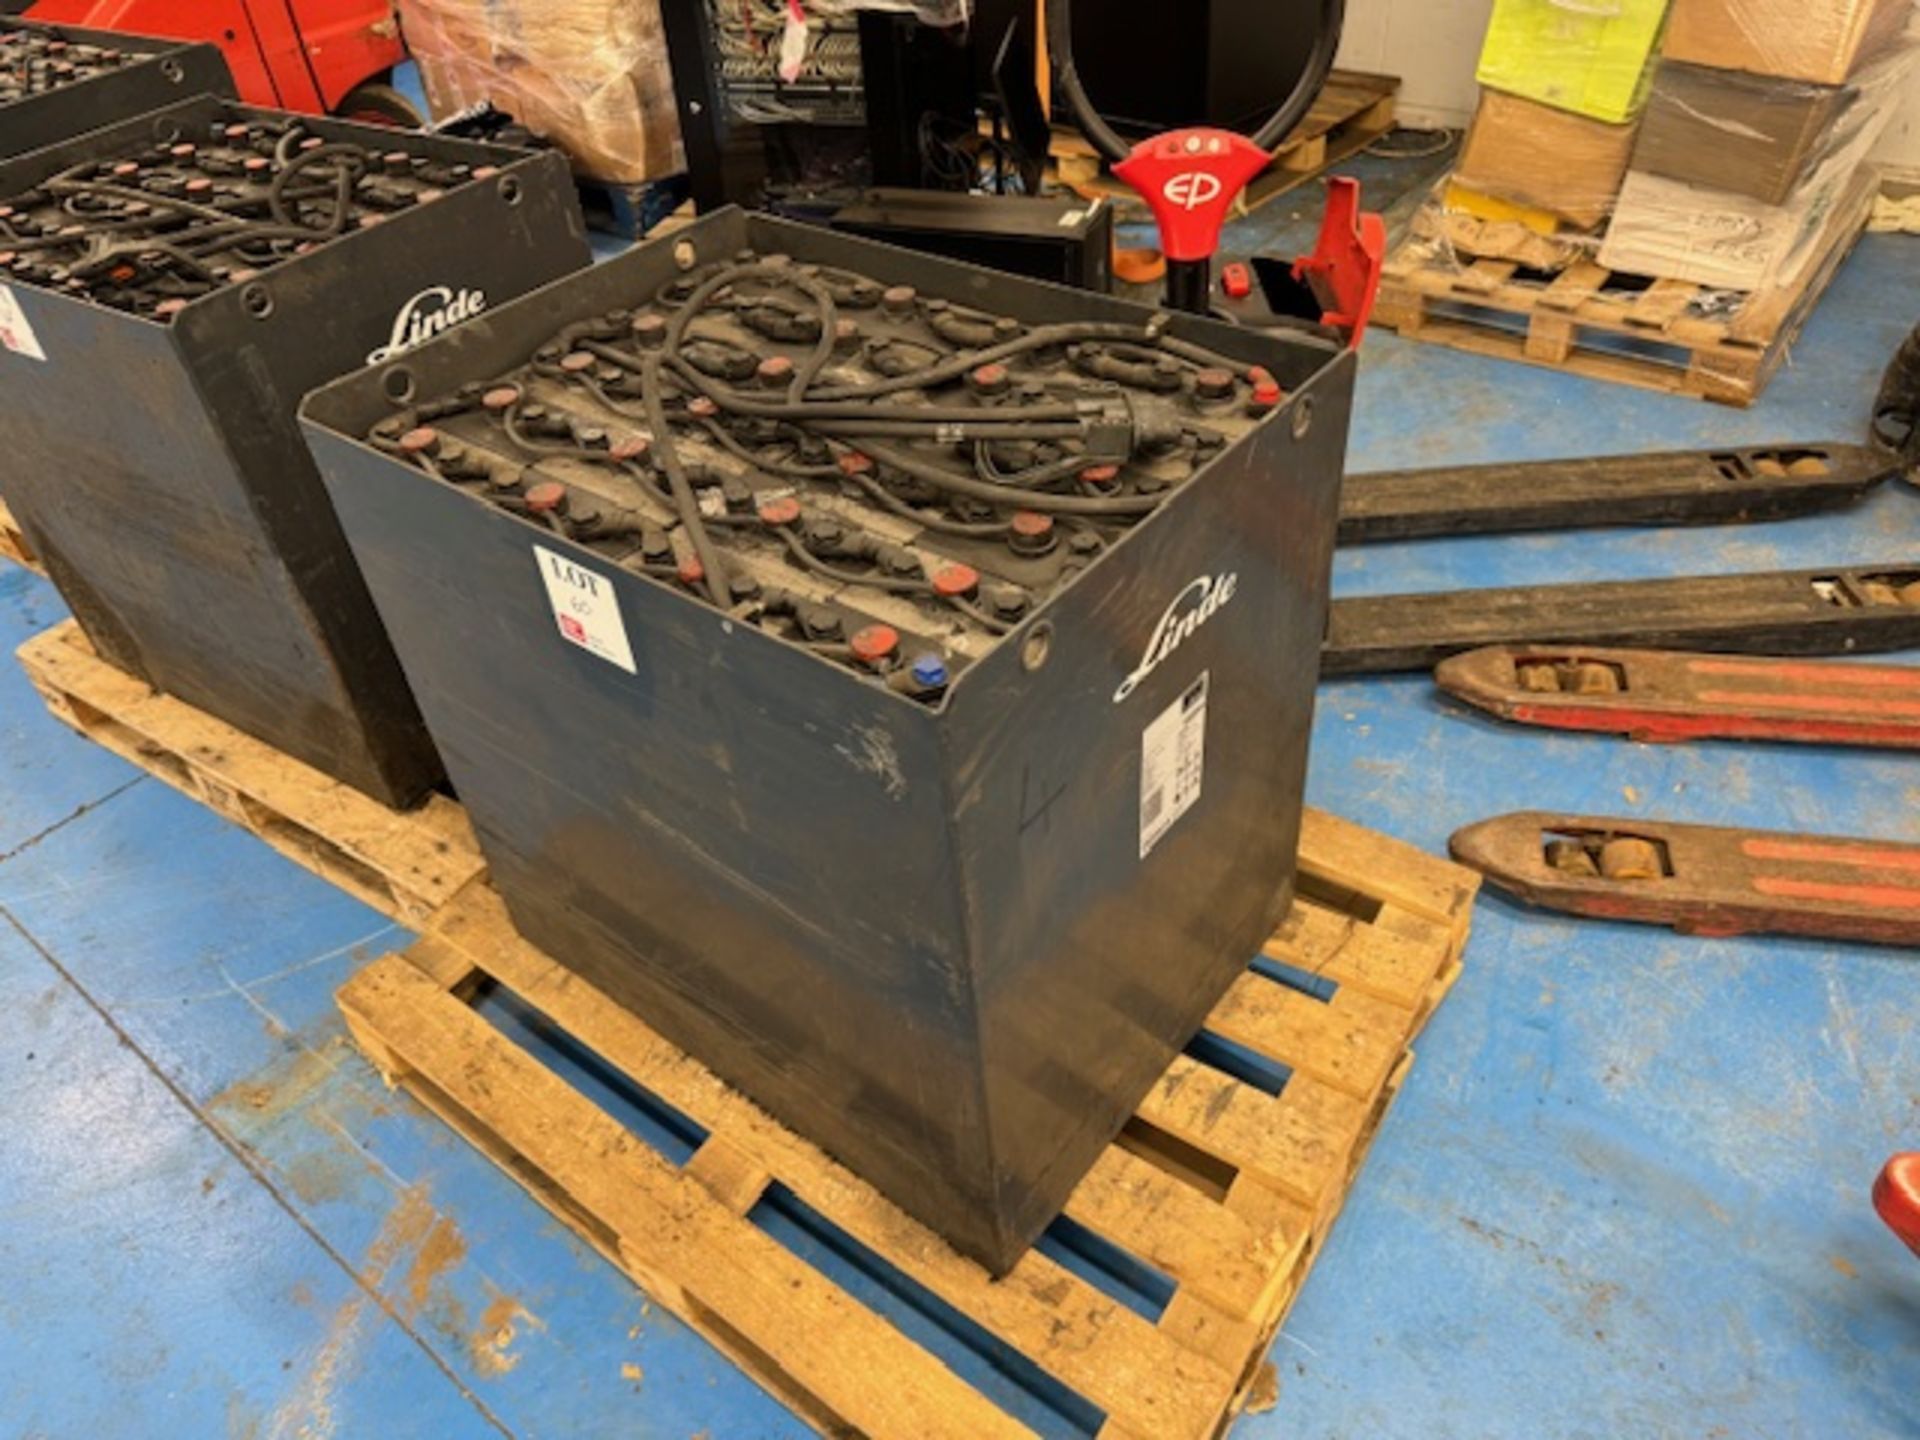 Linde spare battery pack for electric forklifts